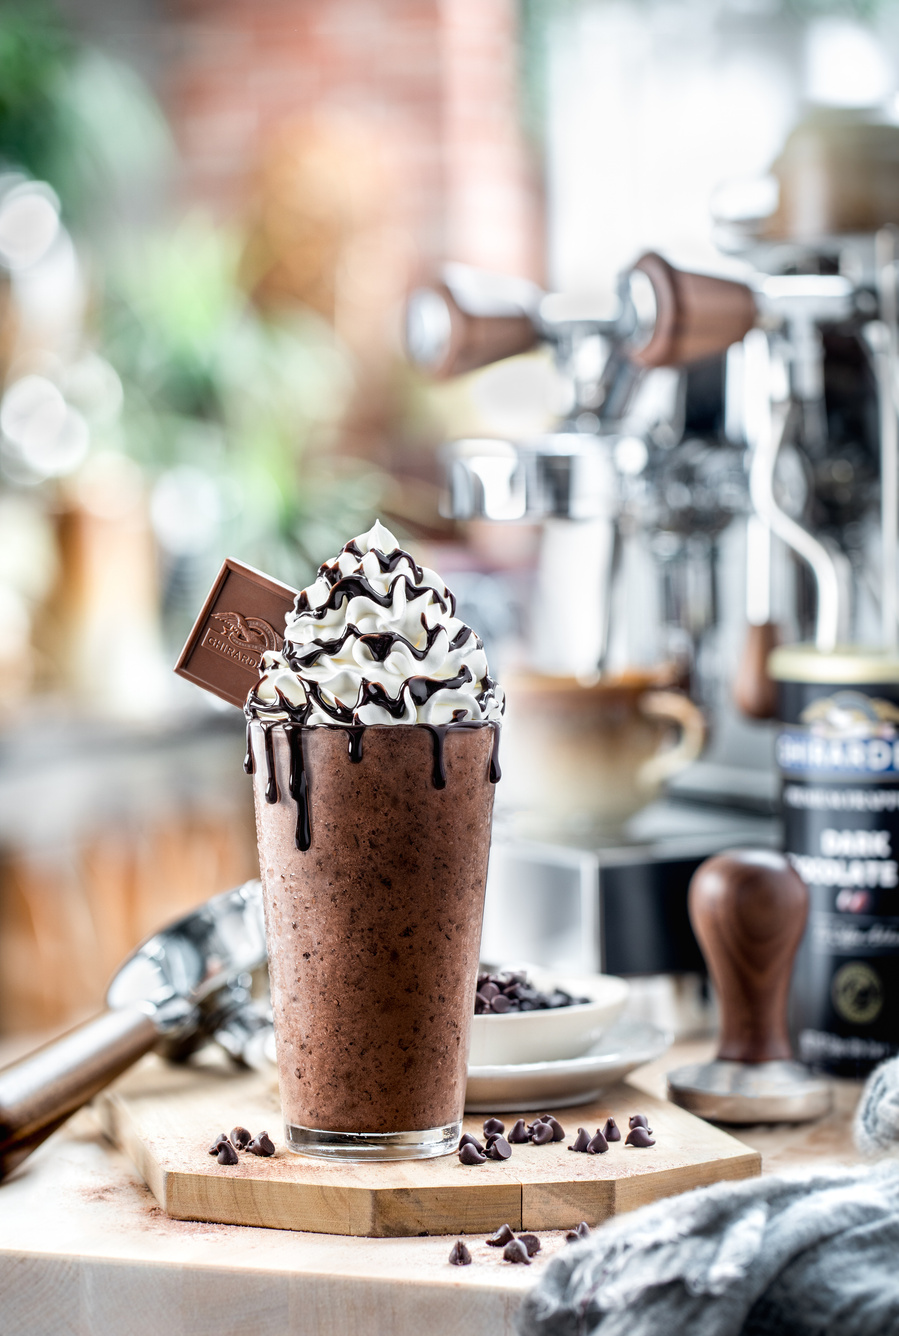 Frozen chocolate mocha with whipped cream, chocolate sauce, and Ghirardelli square in a tall glass in front of a shiny espresso machine.  Bright artistic chocolate photographer style. 